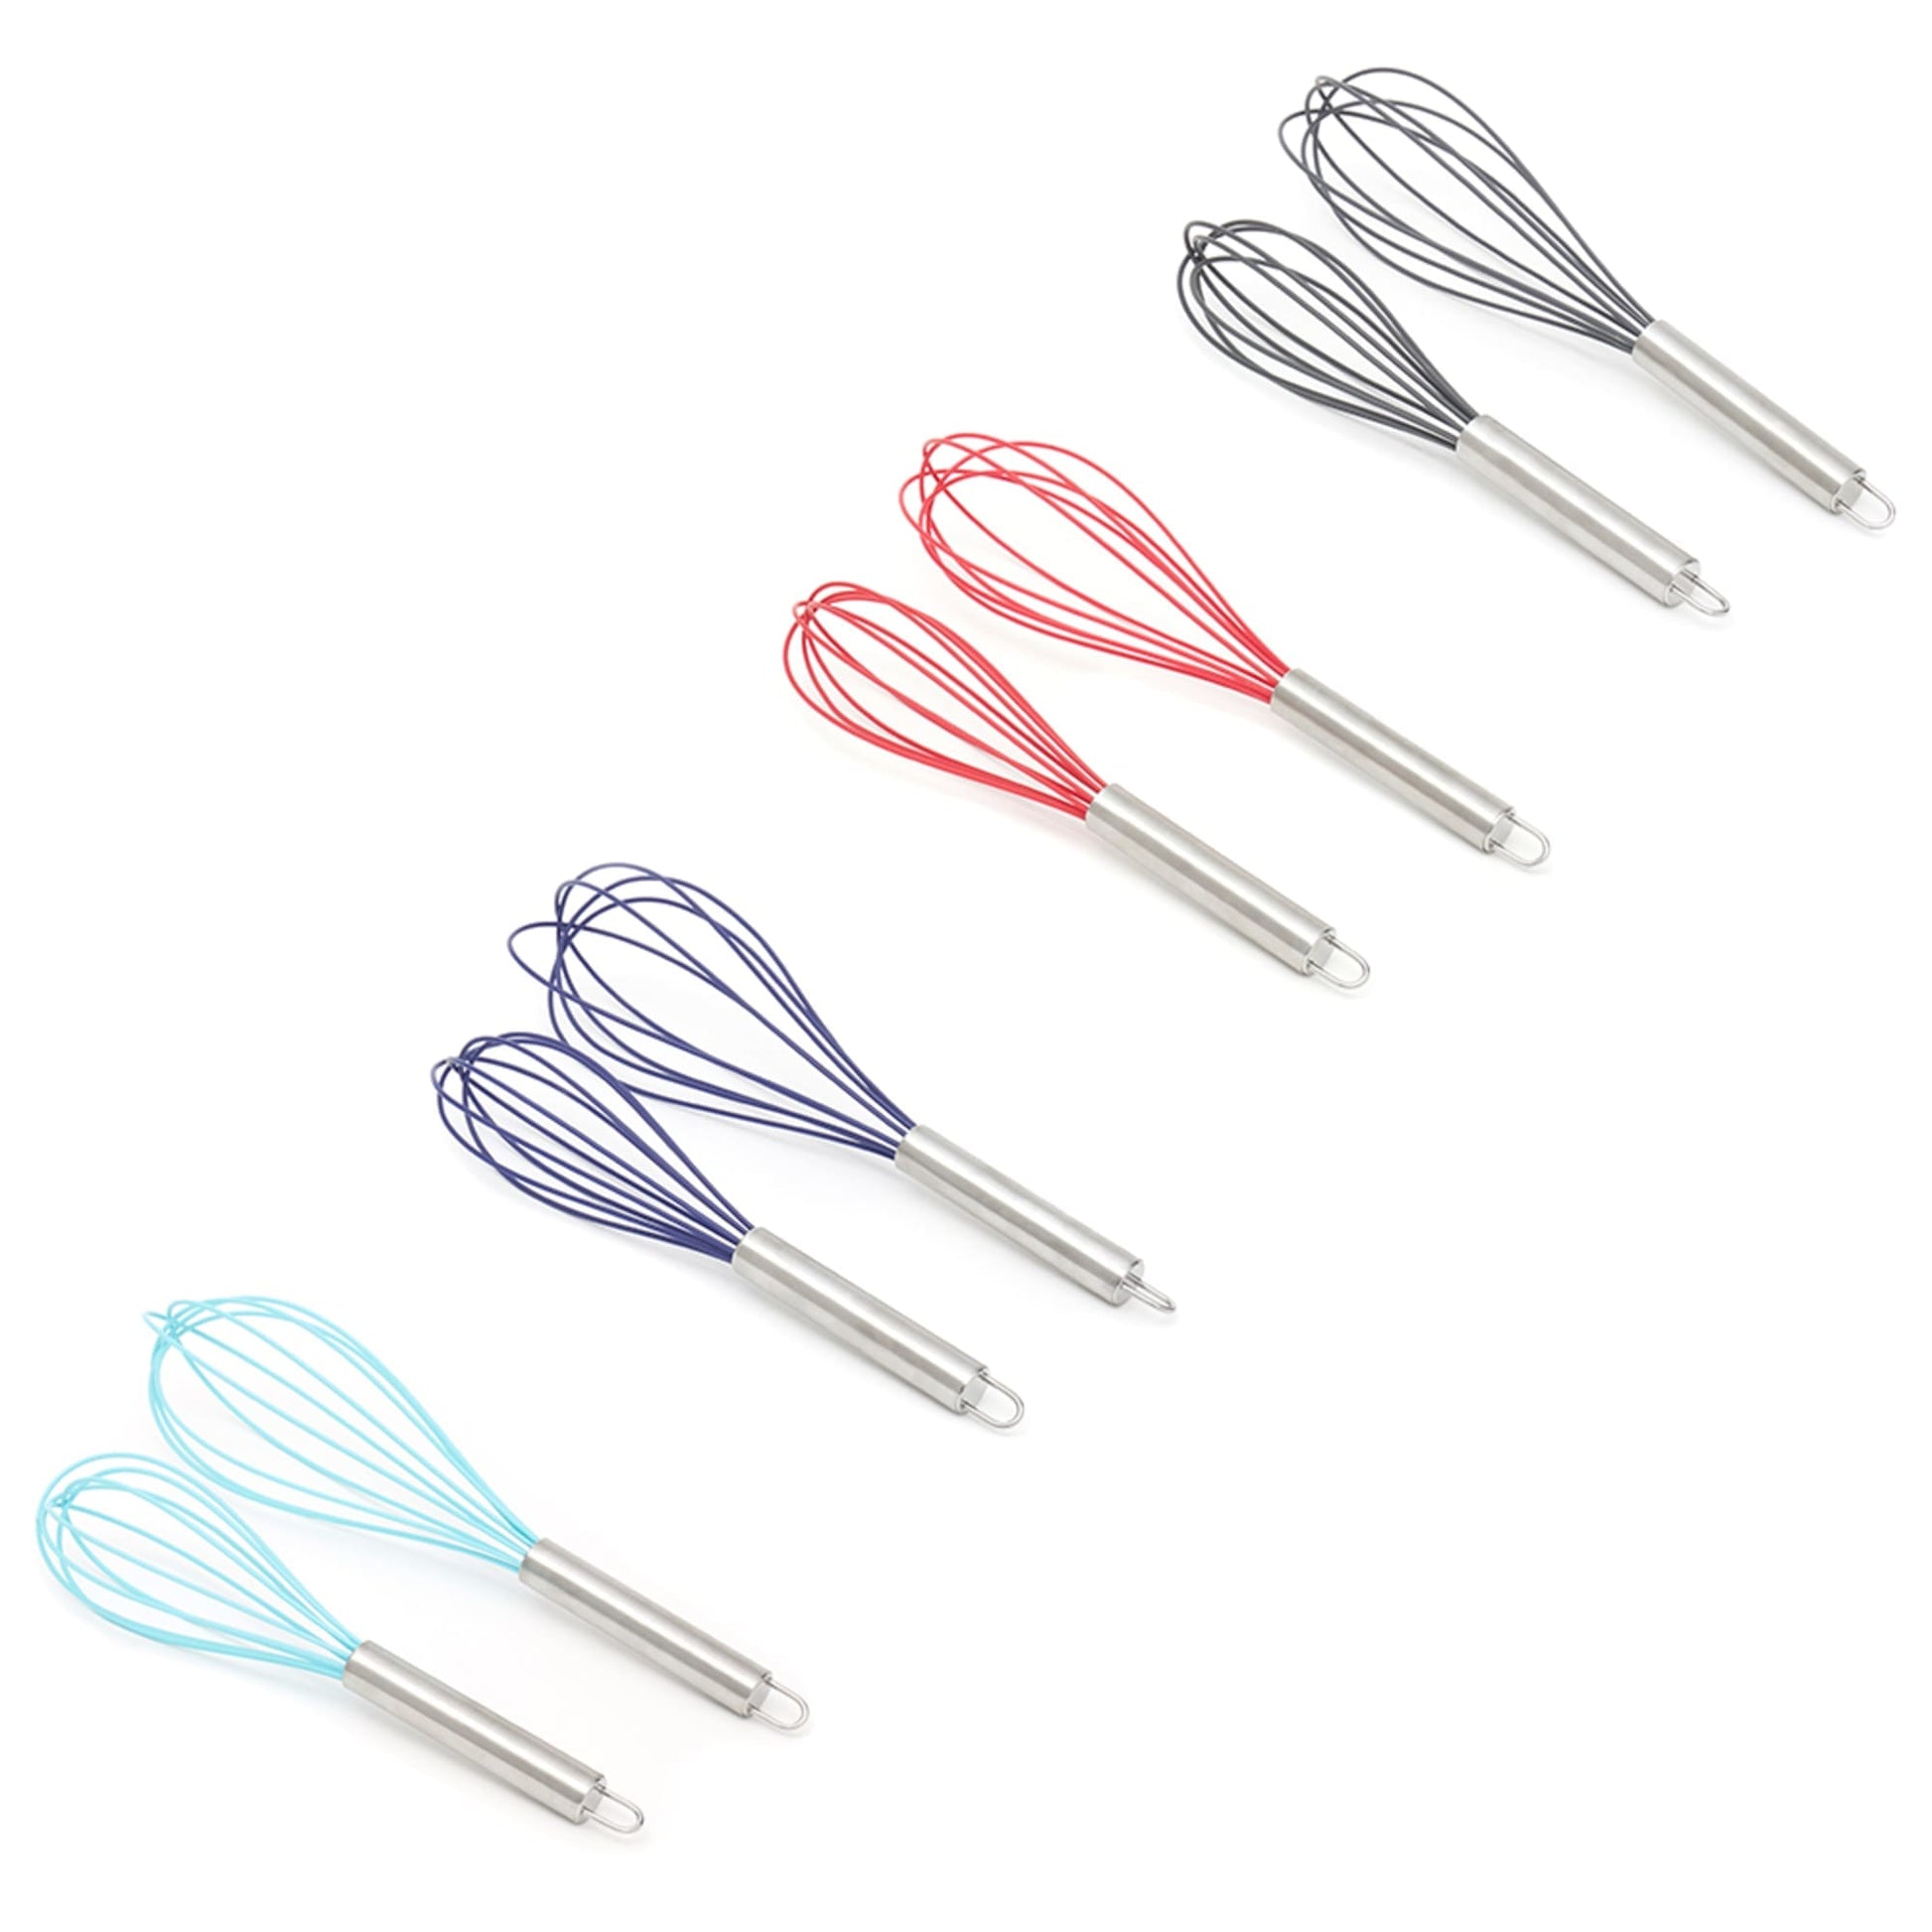  Misen Stainless Steel Whisk with Silicone Handle